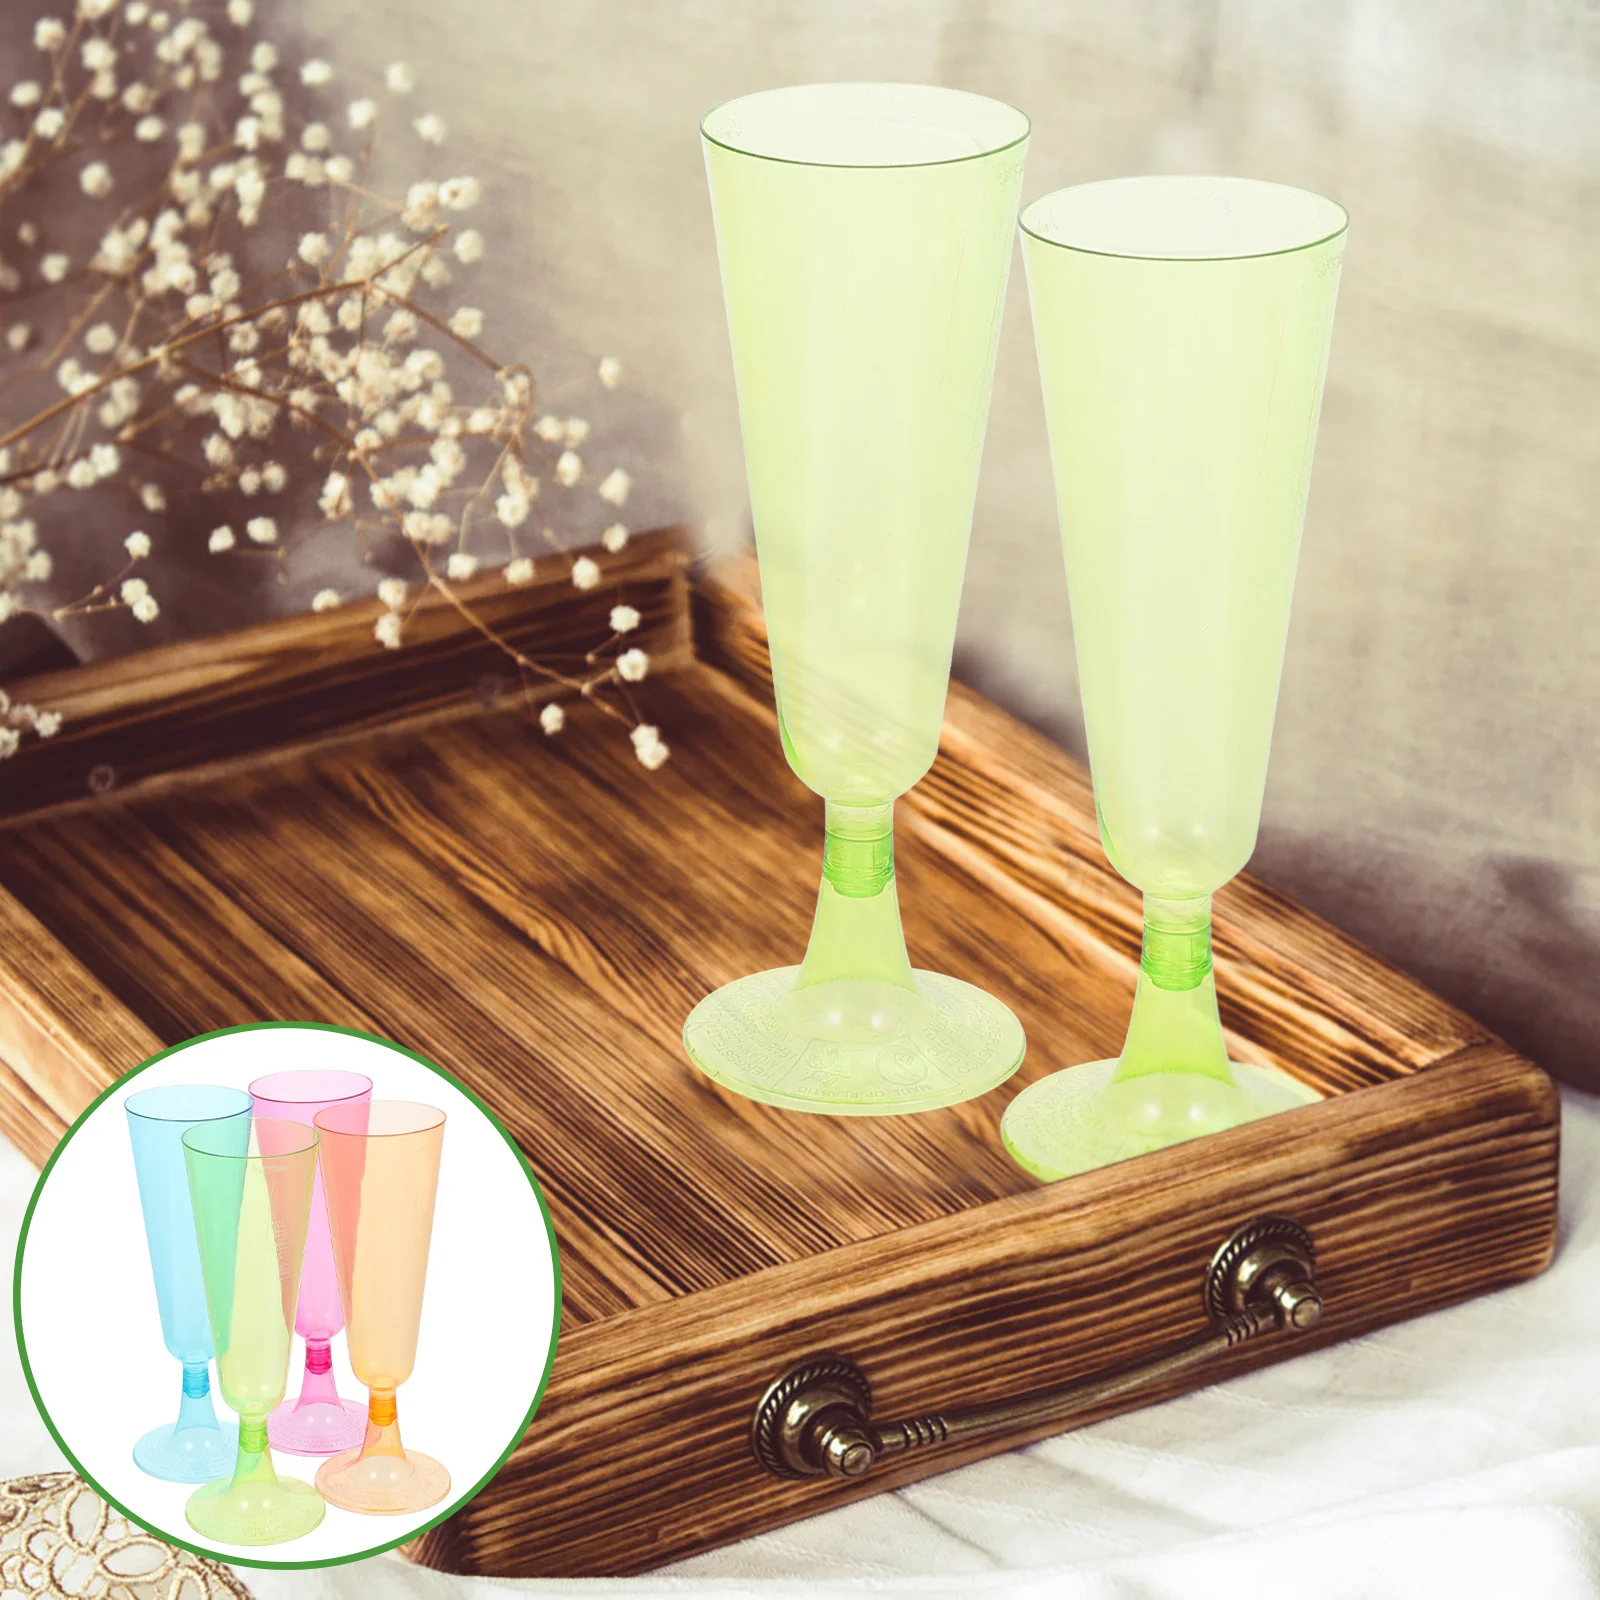 20 Pcs Banquet Cup Cocktail Drinking Glasses Plastic Cocktail Glasses Plastic Toasting Flute Beverage Cups